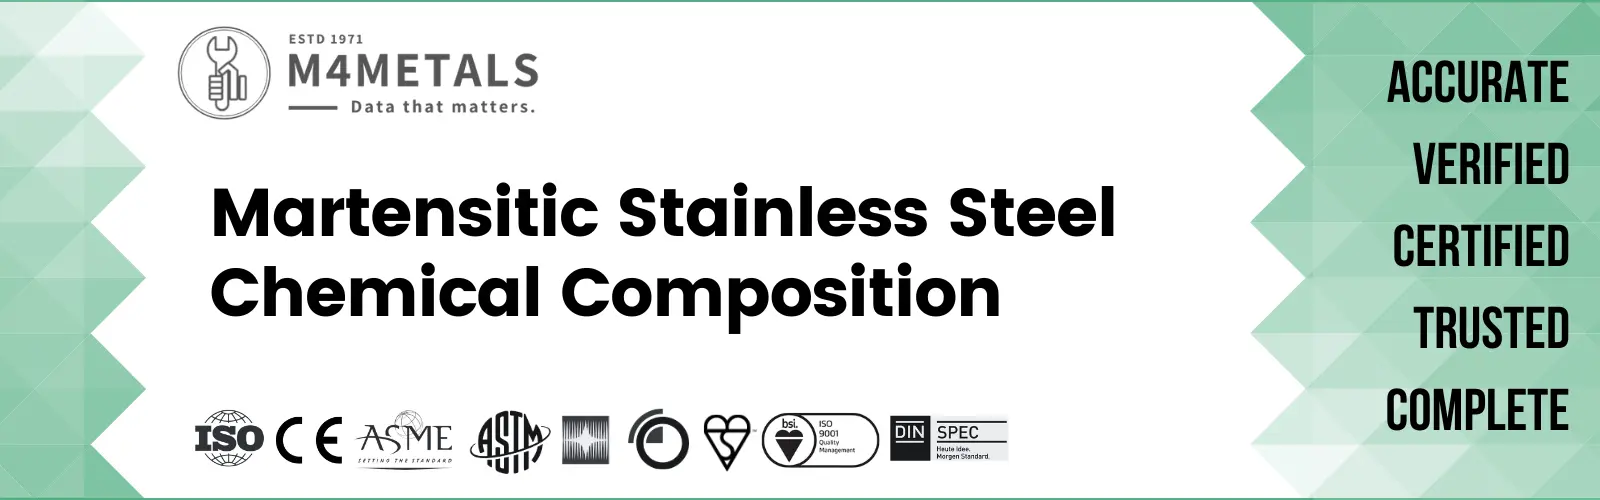 Martensitic Stainless Steel Chemical Composition